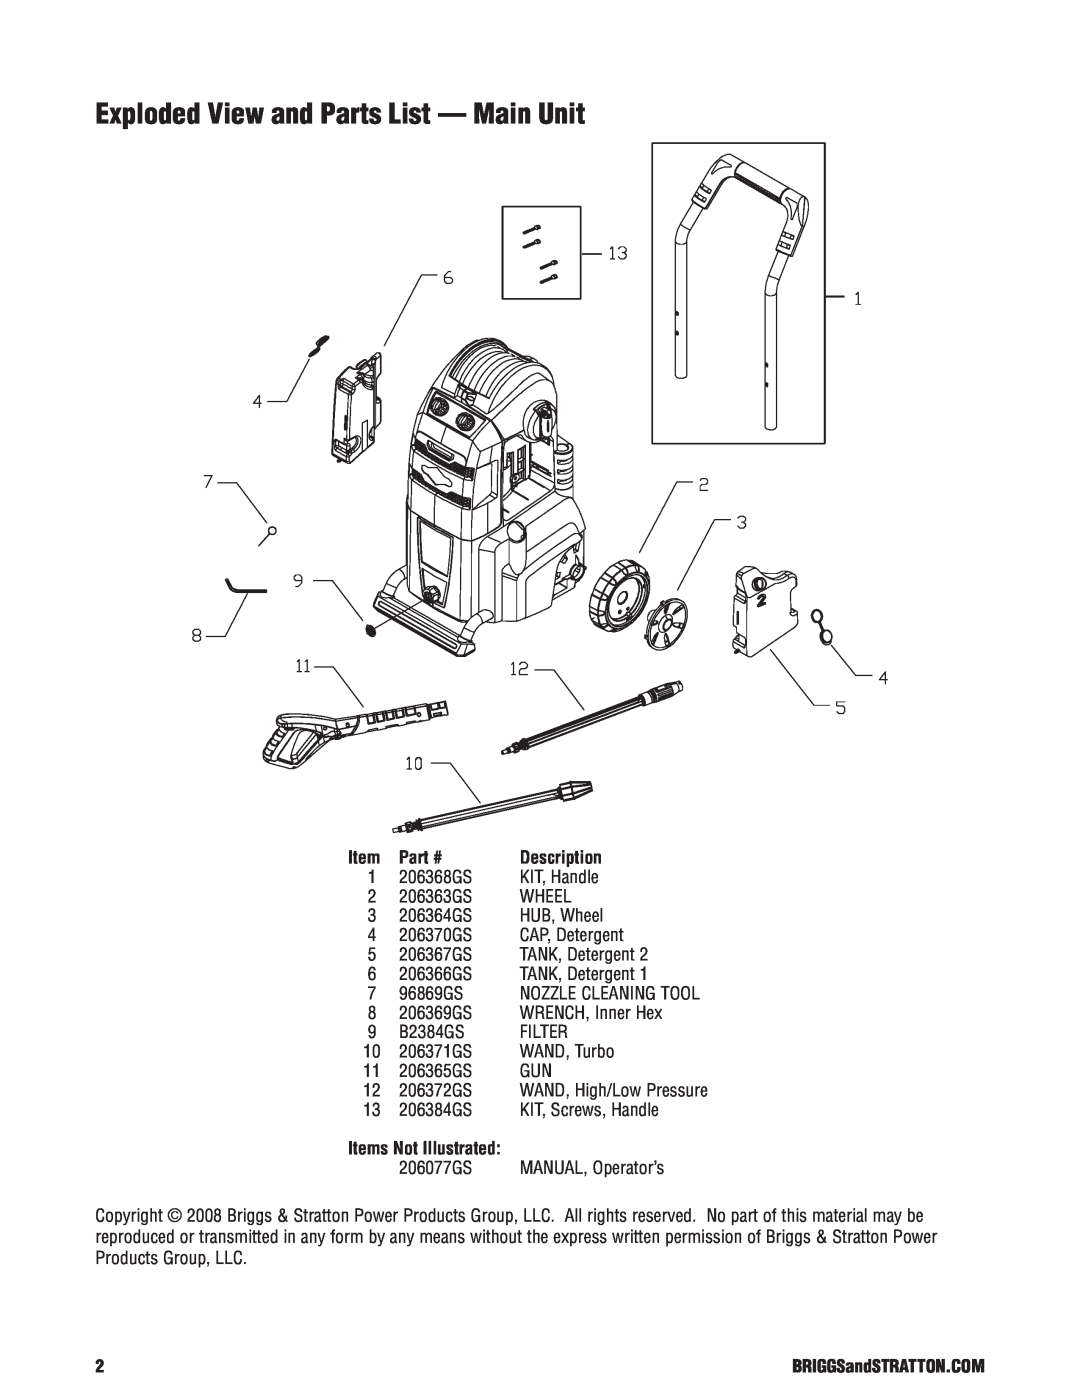 Briggs & Stratton 20358 manual Exploded View and Parts List — Main Unit, Description, Items Not Illustrated 